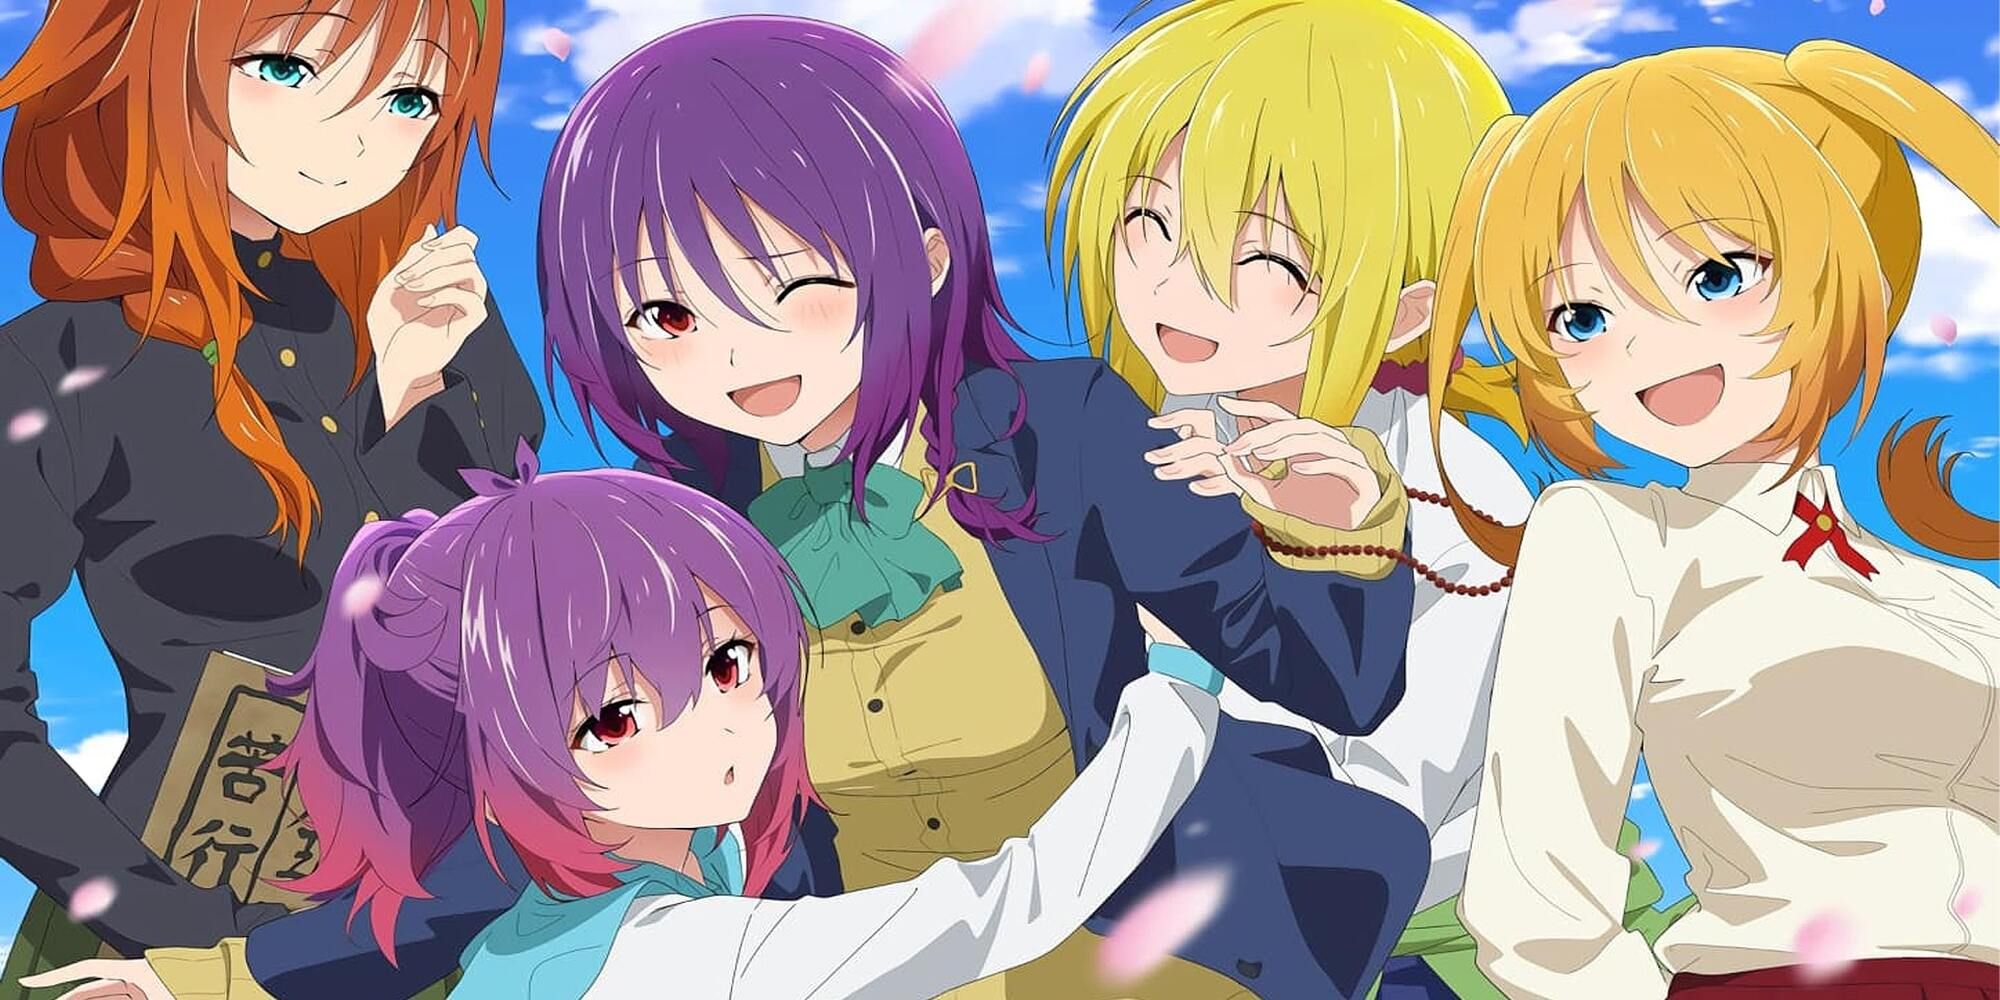 Akimitsu stands smiling with four girls in Temple anime image.